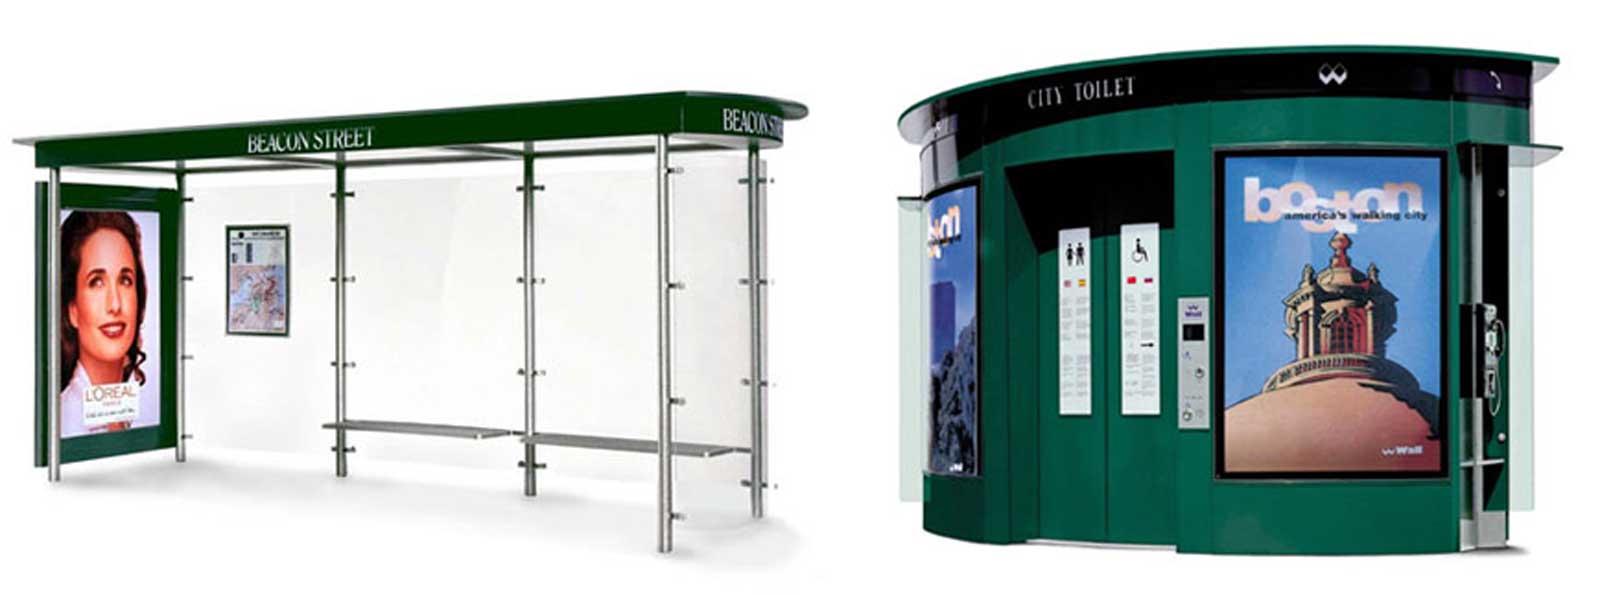 Image for a bus shelter and a public toilet